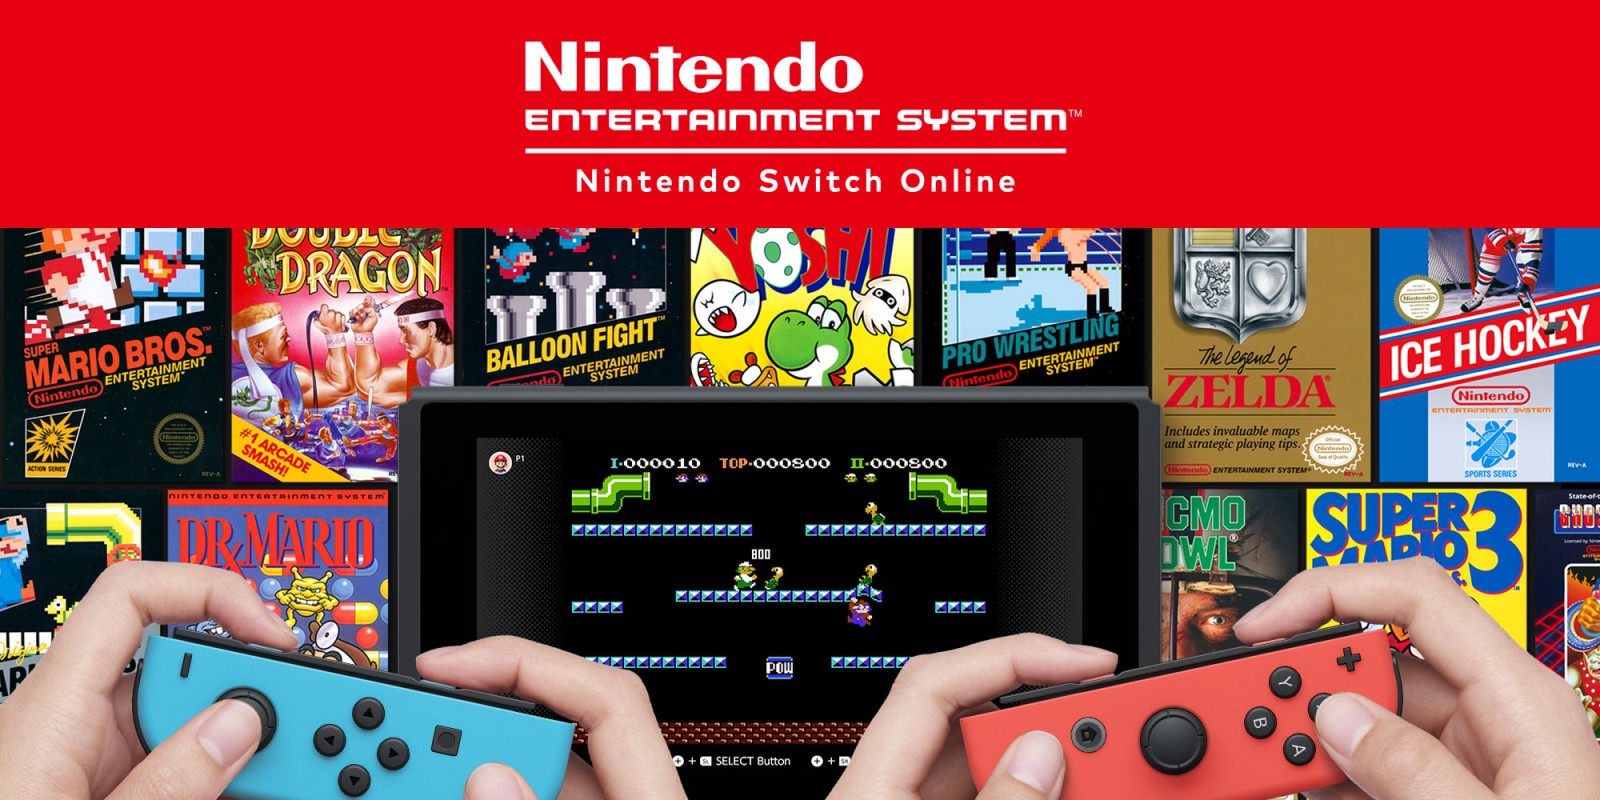 Nintendo Switch online will be improved by Nintendo